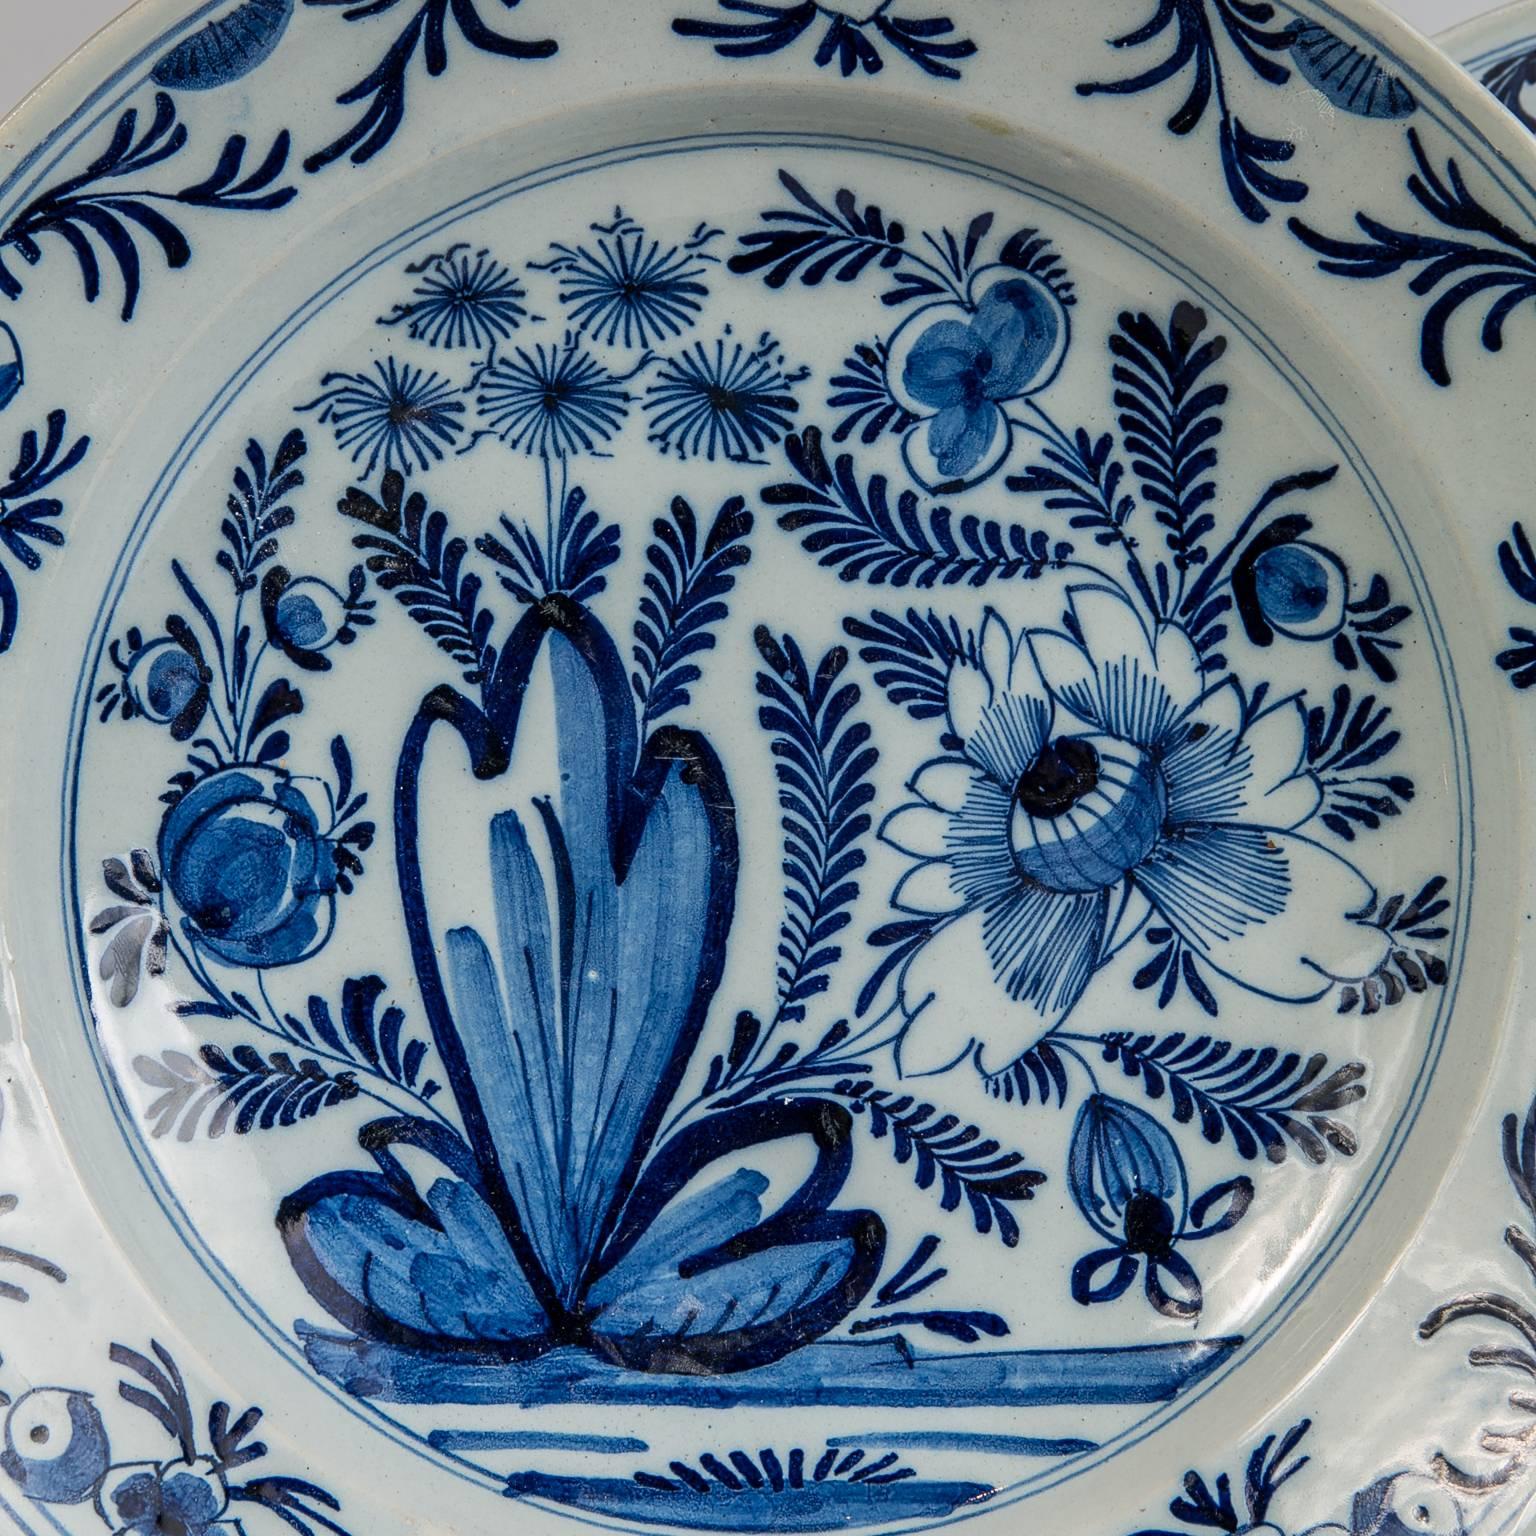 Pair of Blue and White Delft Chargers Made in Netherlands circa 1800 (Handbemalt)